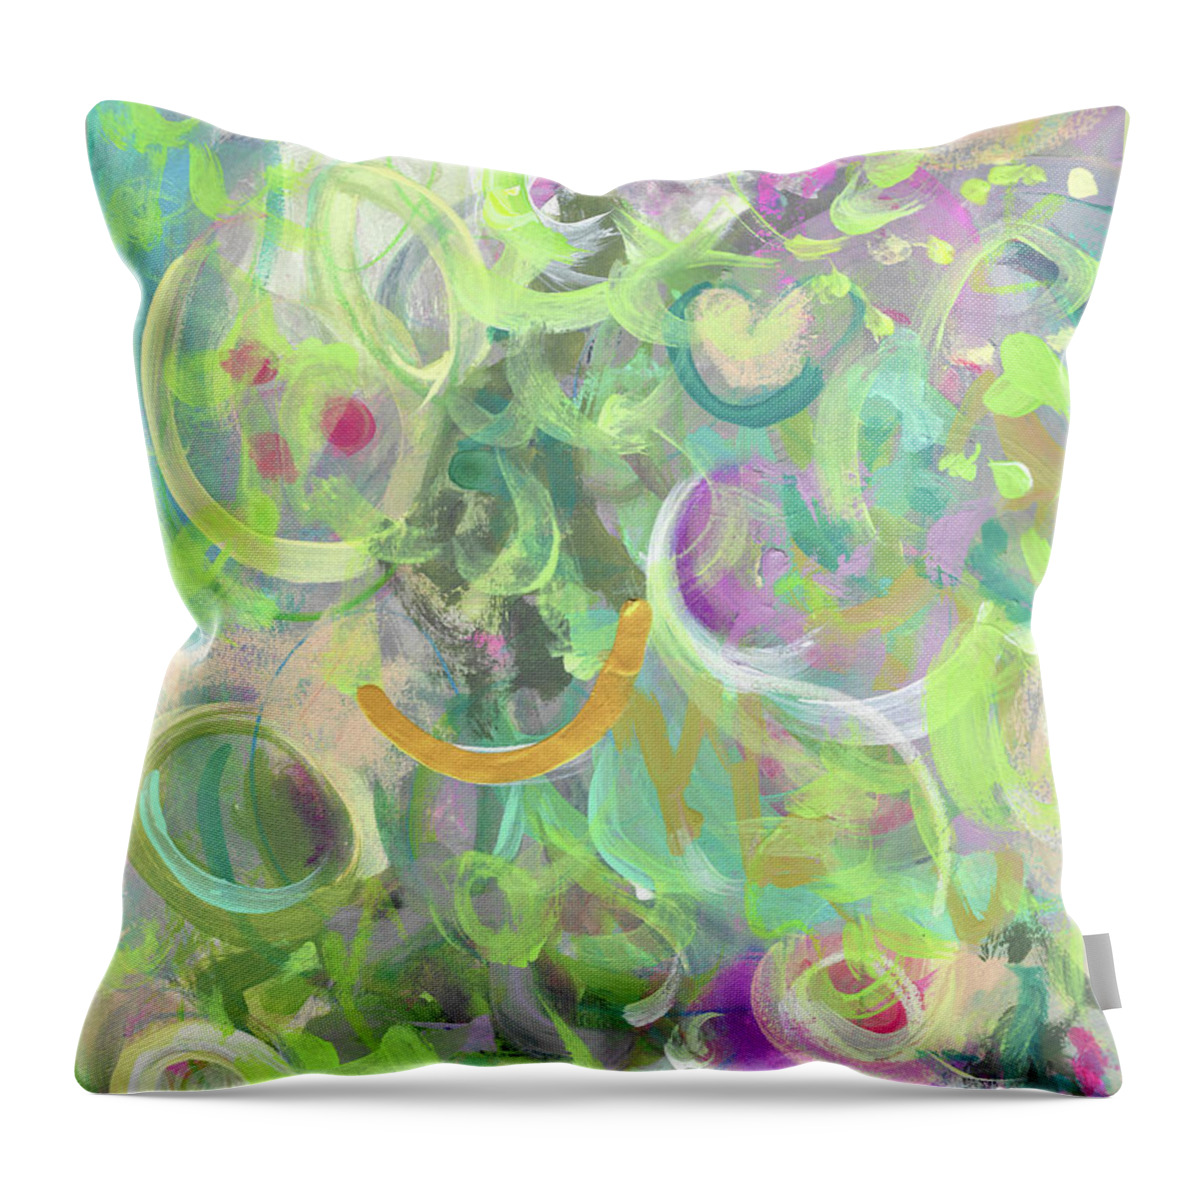 Spring Throw Pillow featuring the painting Printemps 1 by Kristen Abrahamson